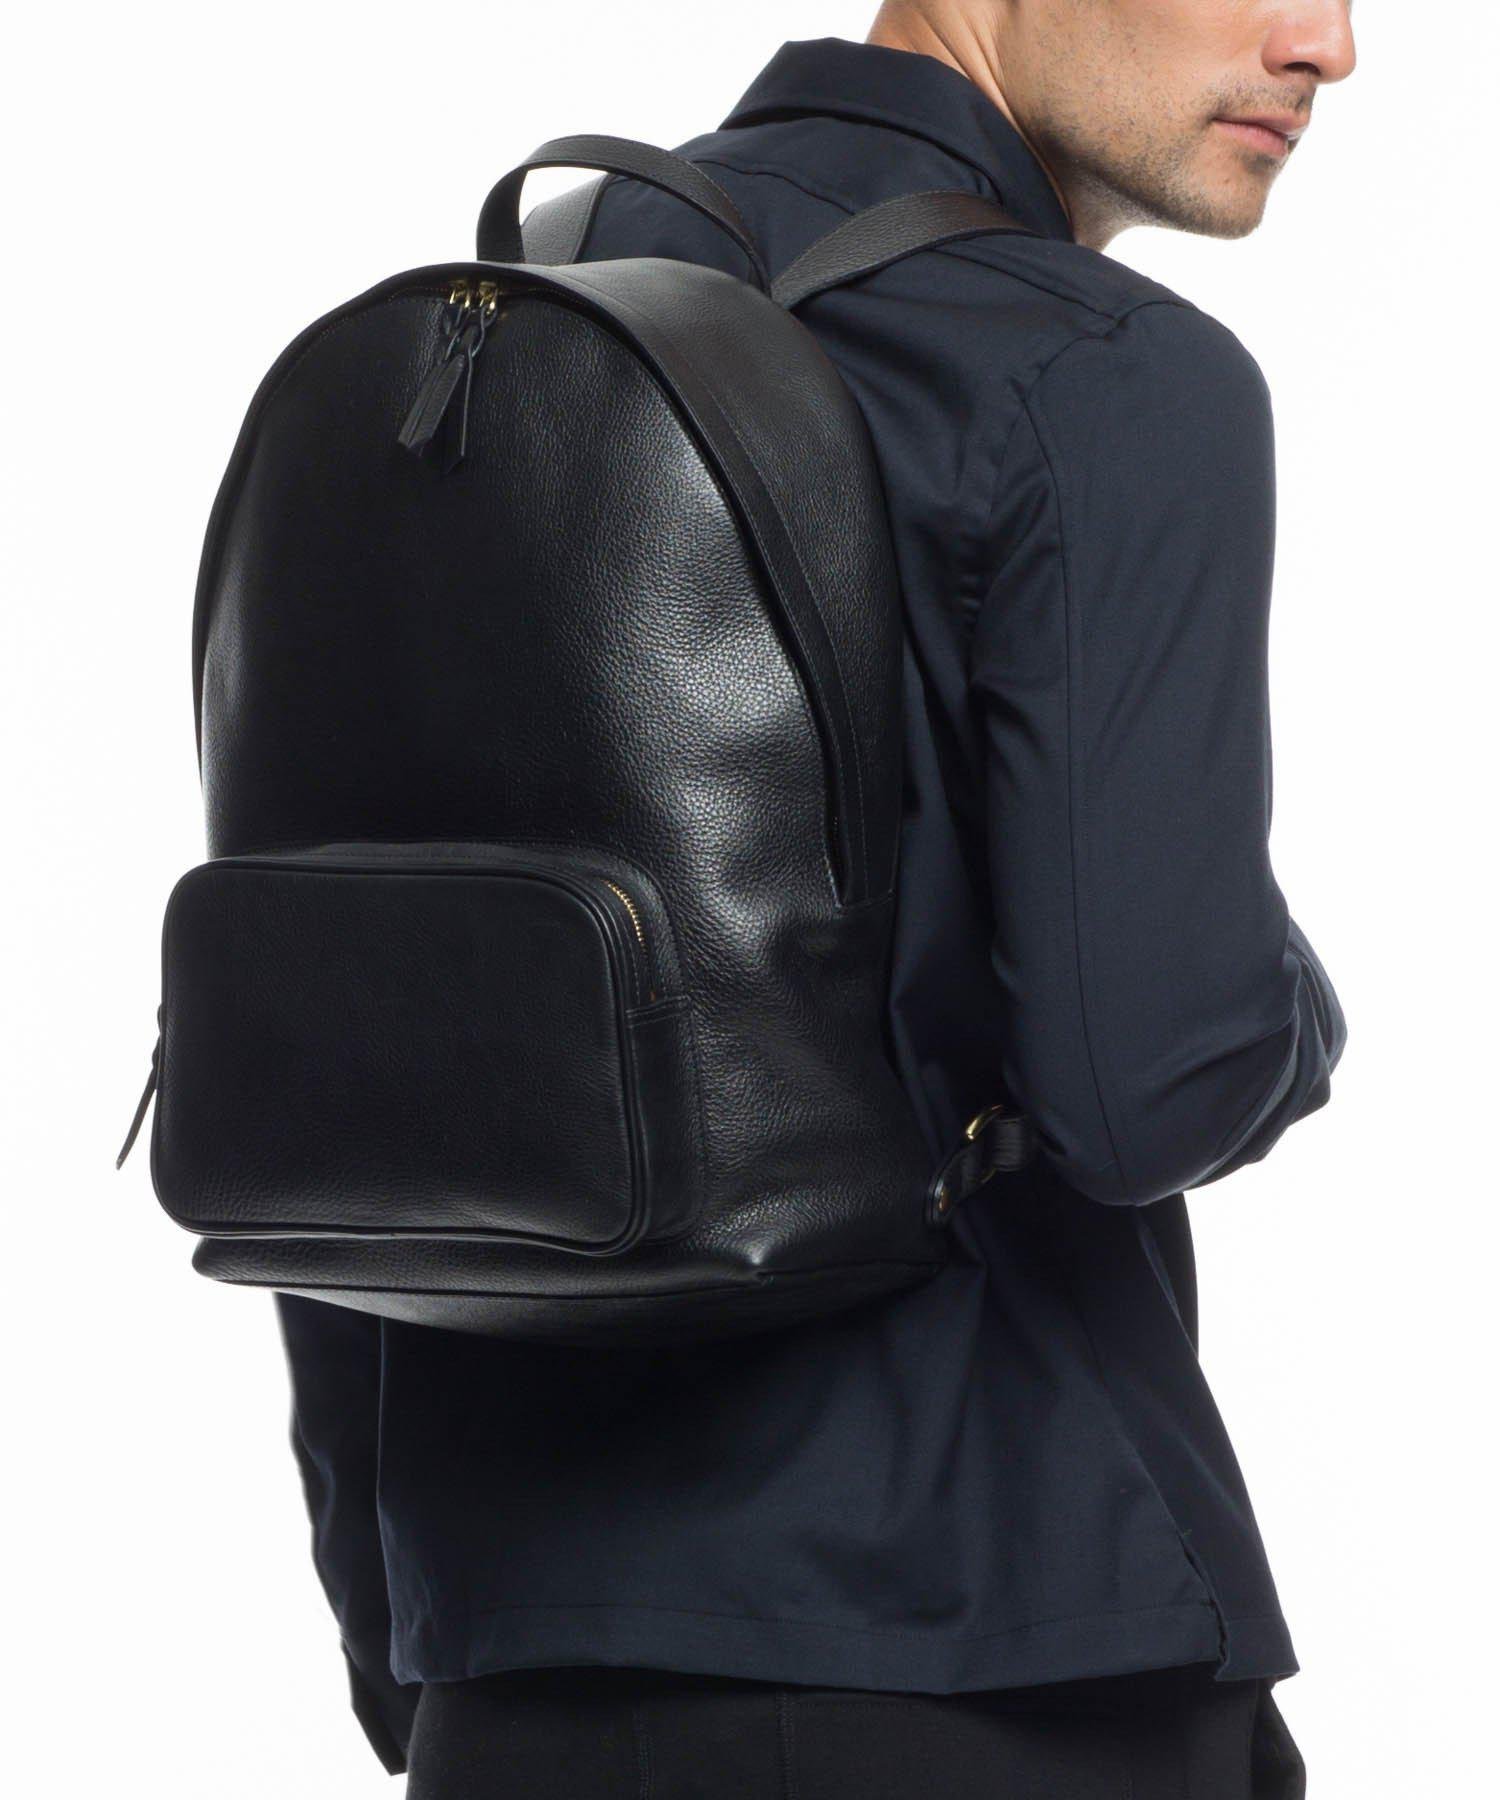 Backpack – Wellx New Gadgets